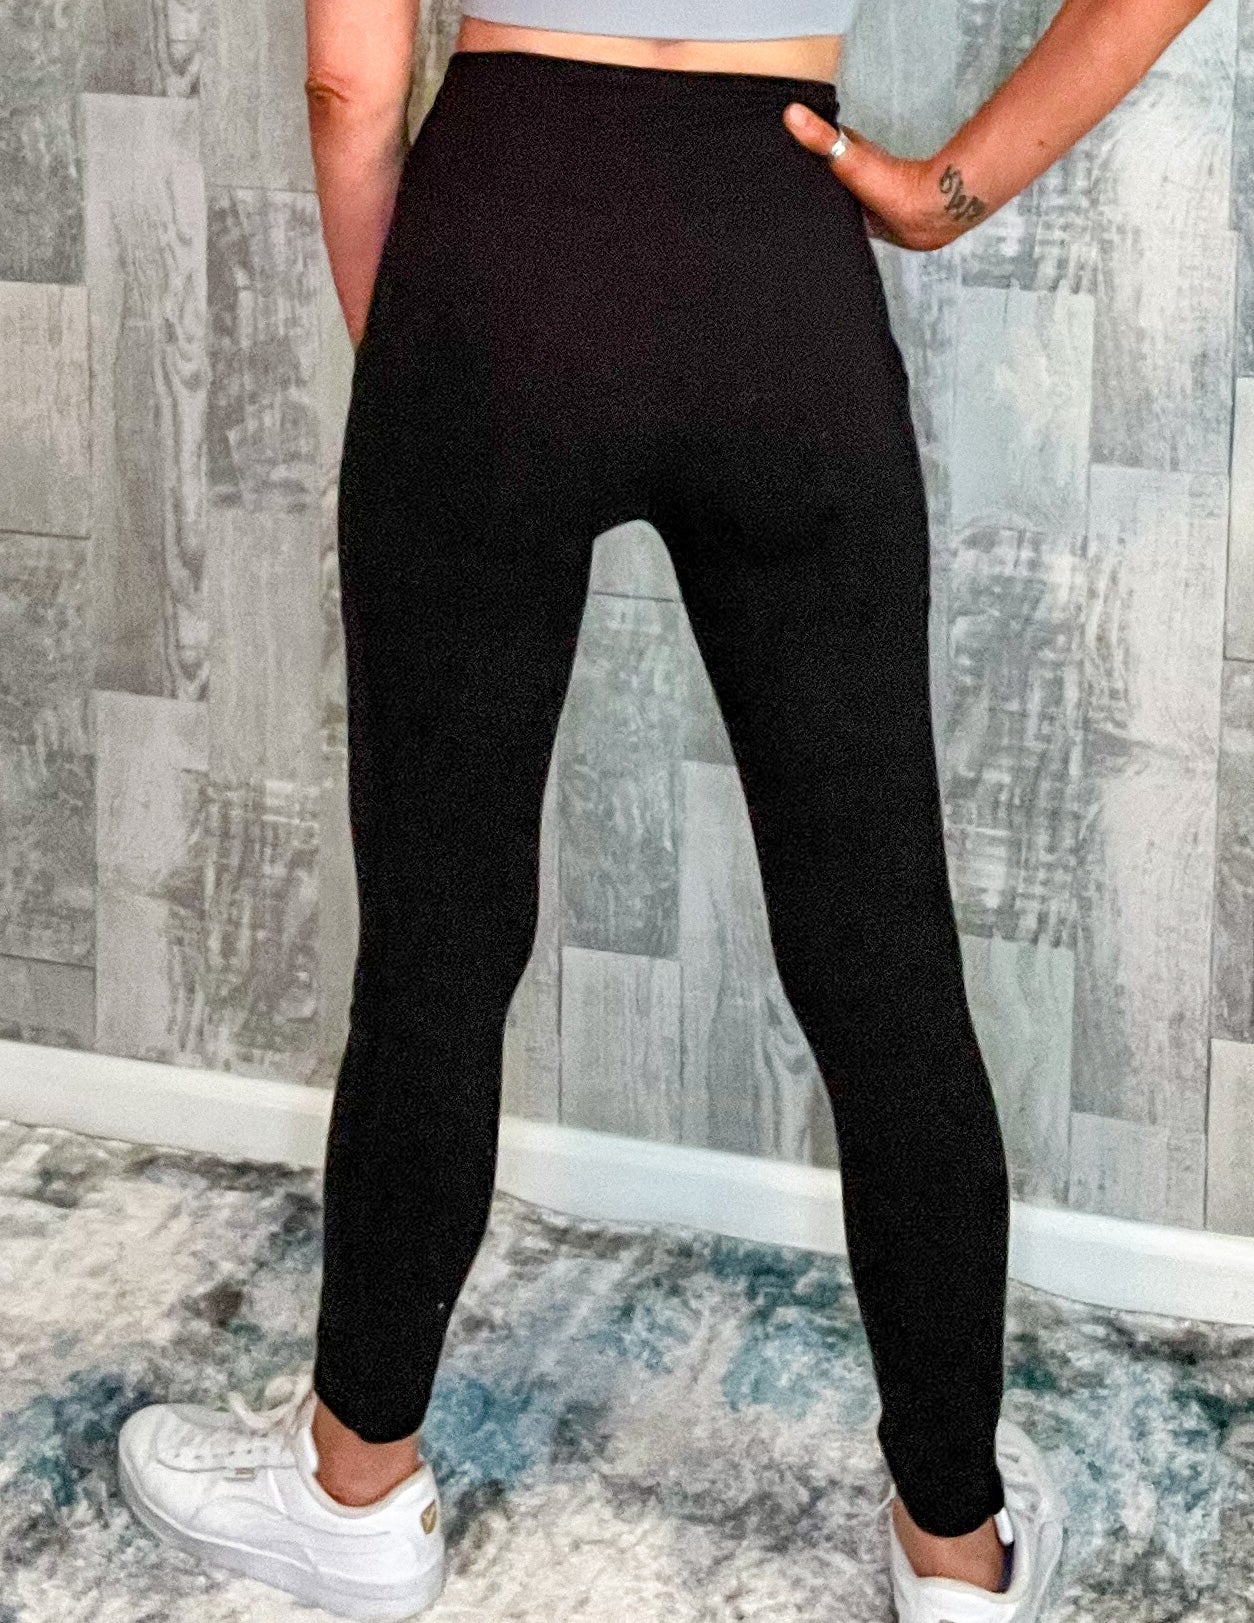 Pants athletic wear, buttery soft fabric, clothing, four-way stretch fabric, high waist leggings, on the go leggings, seamless front leggings, stylish activewear, women's fitness fashion, workout leggings with pockets Size: Small, Medium, Large, XL, 2XL,